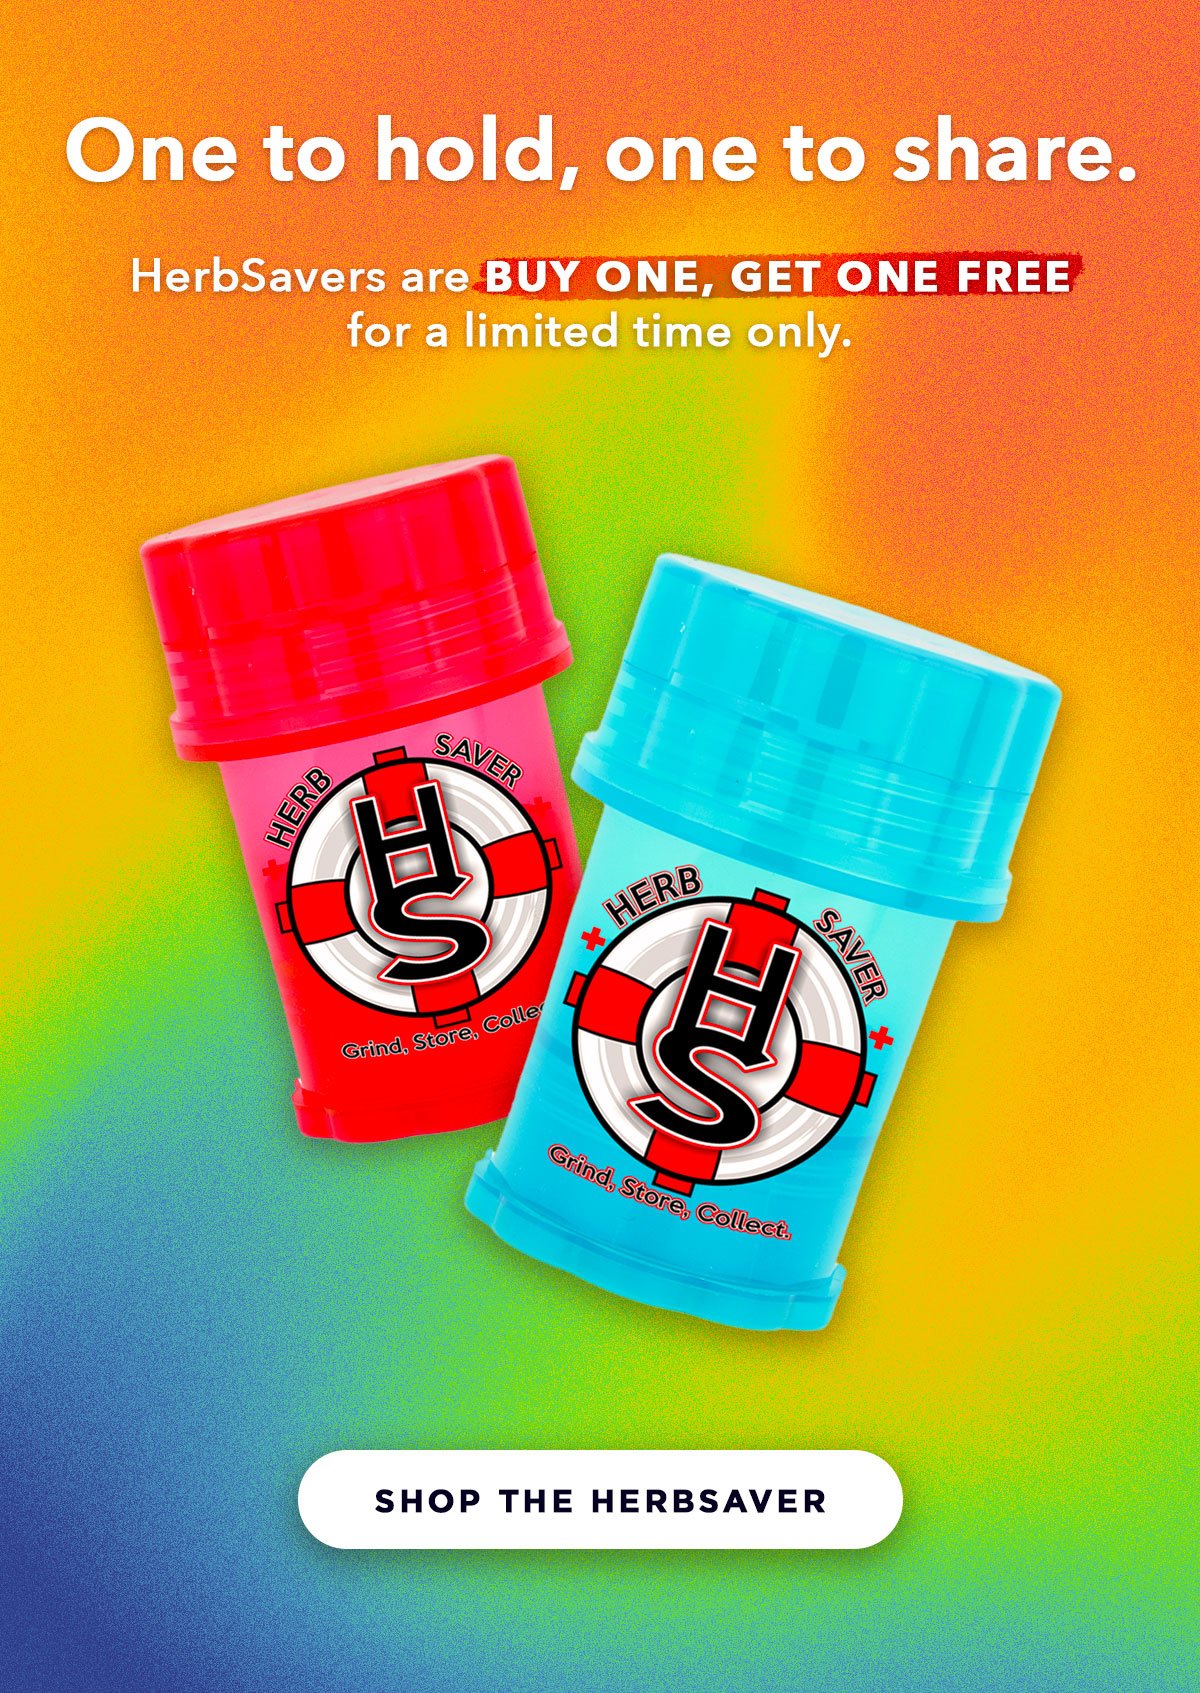 HerbSaver - Buy one, get one free for two weeks!